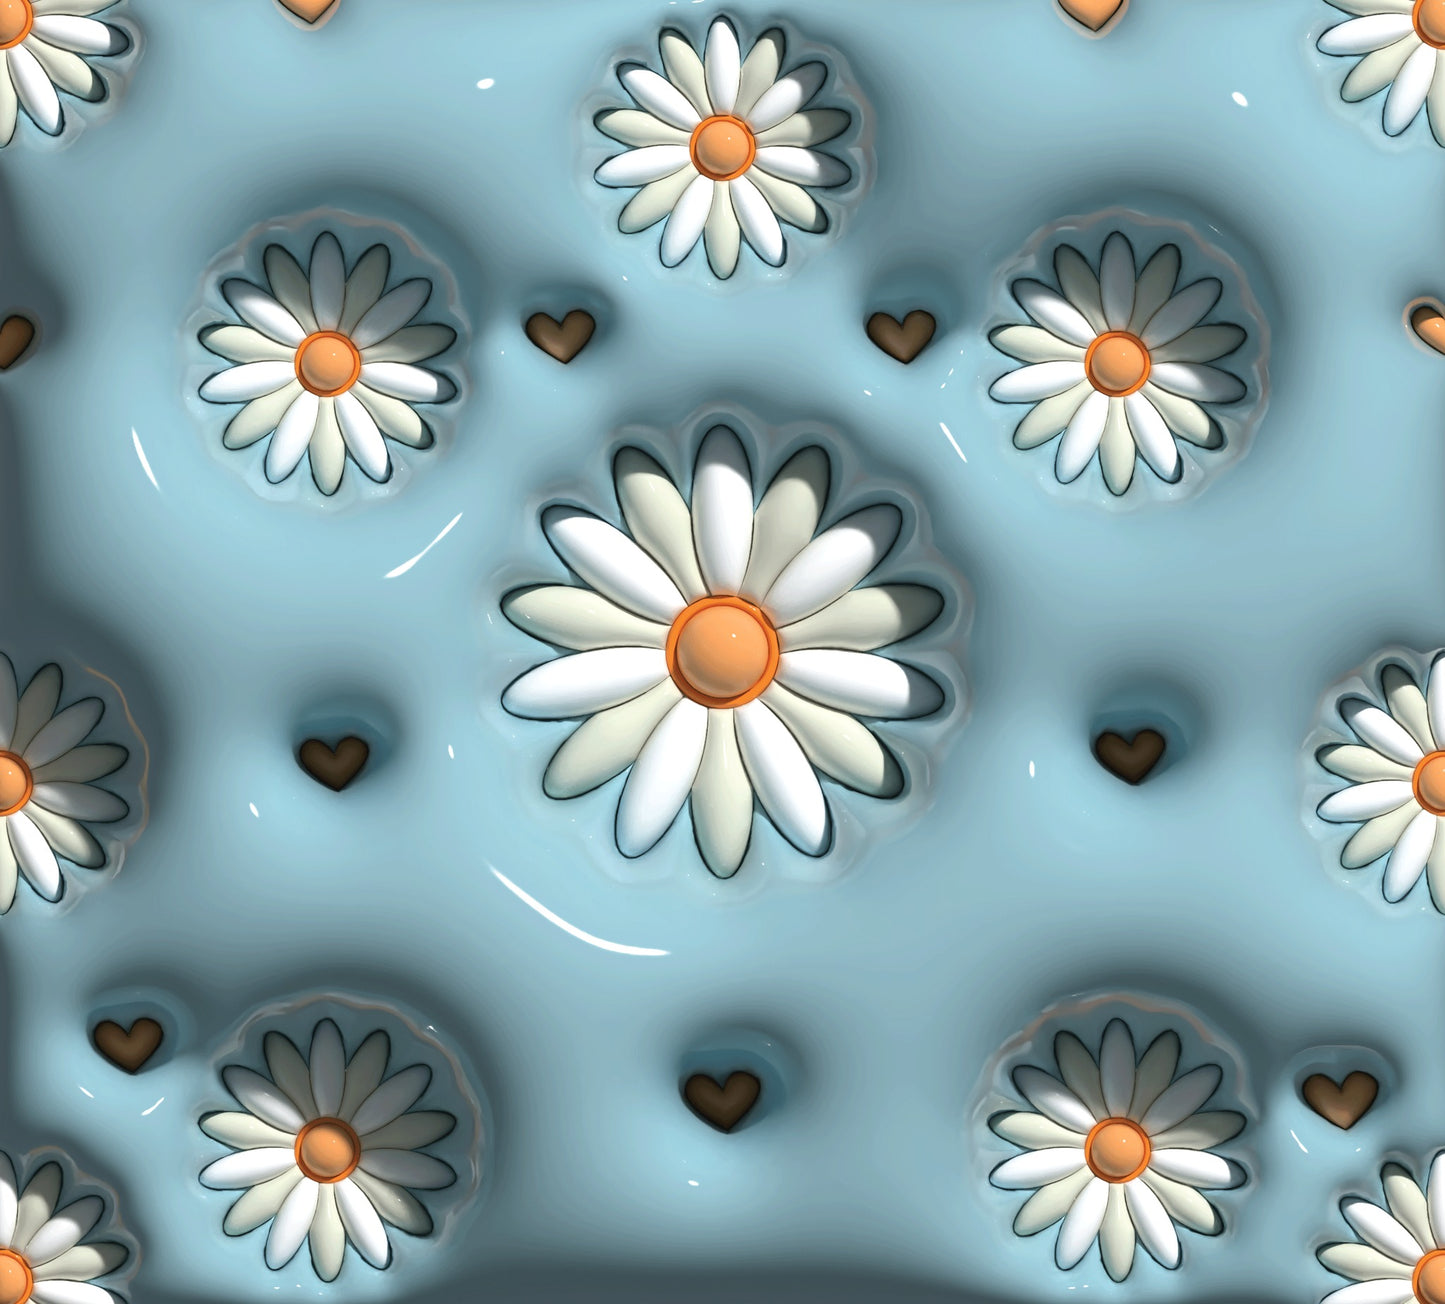 Inflated Daisies - 3D Inflated 20 Oz Sublimation Transfer